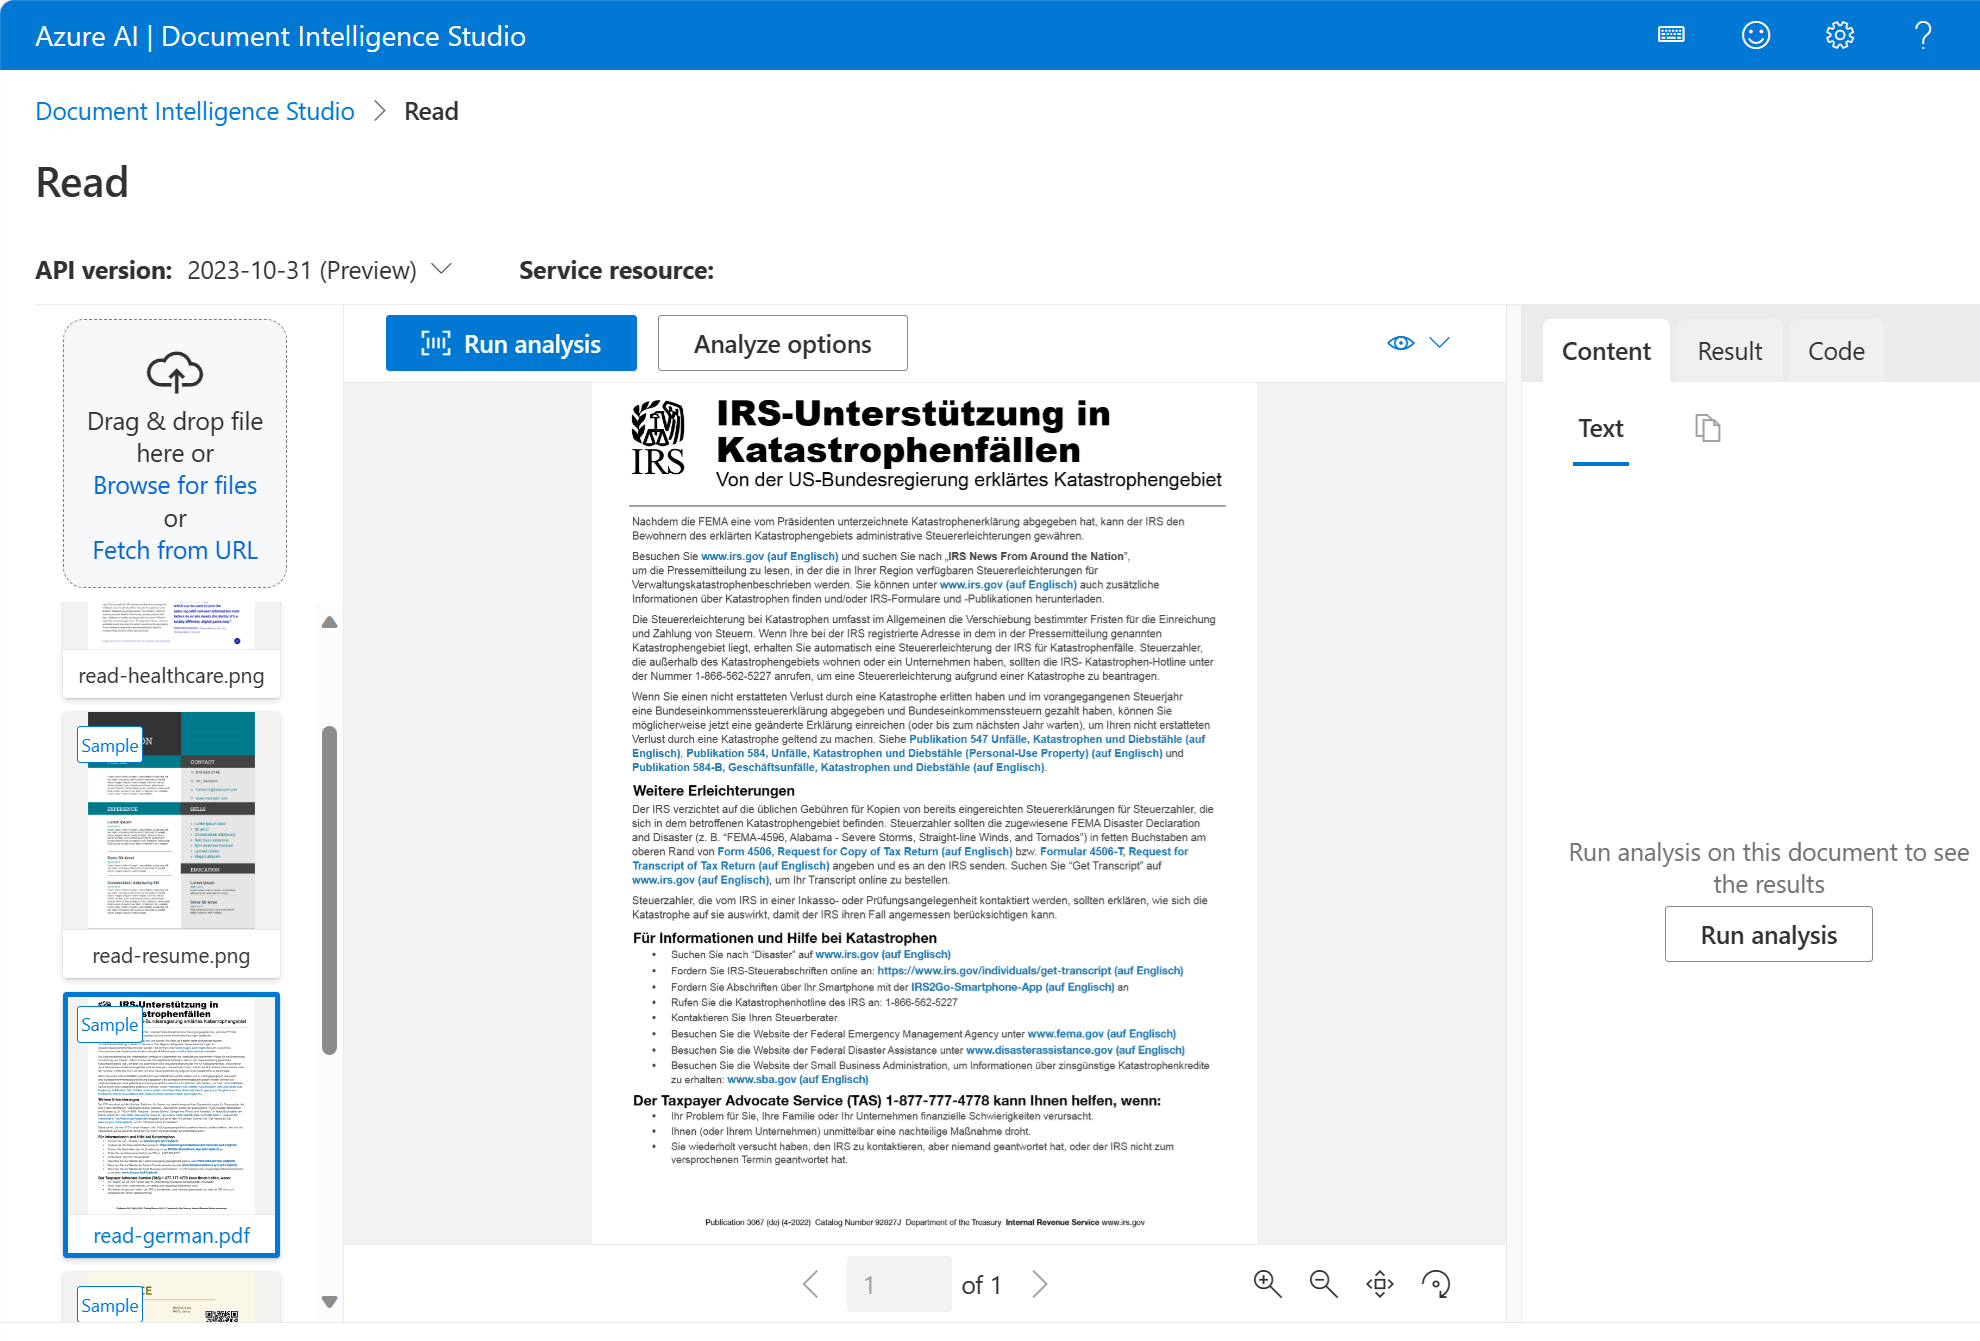 Screenshot showing the Read page in Azure AI Document Intelligence Studio.